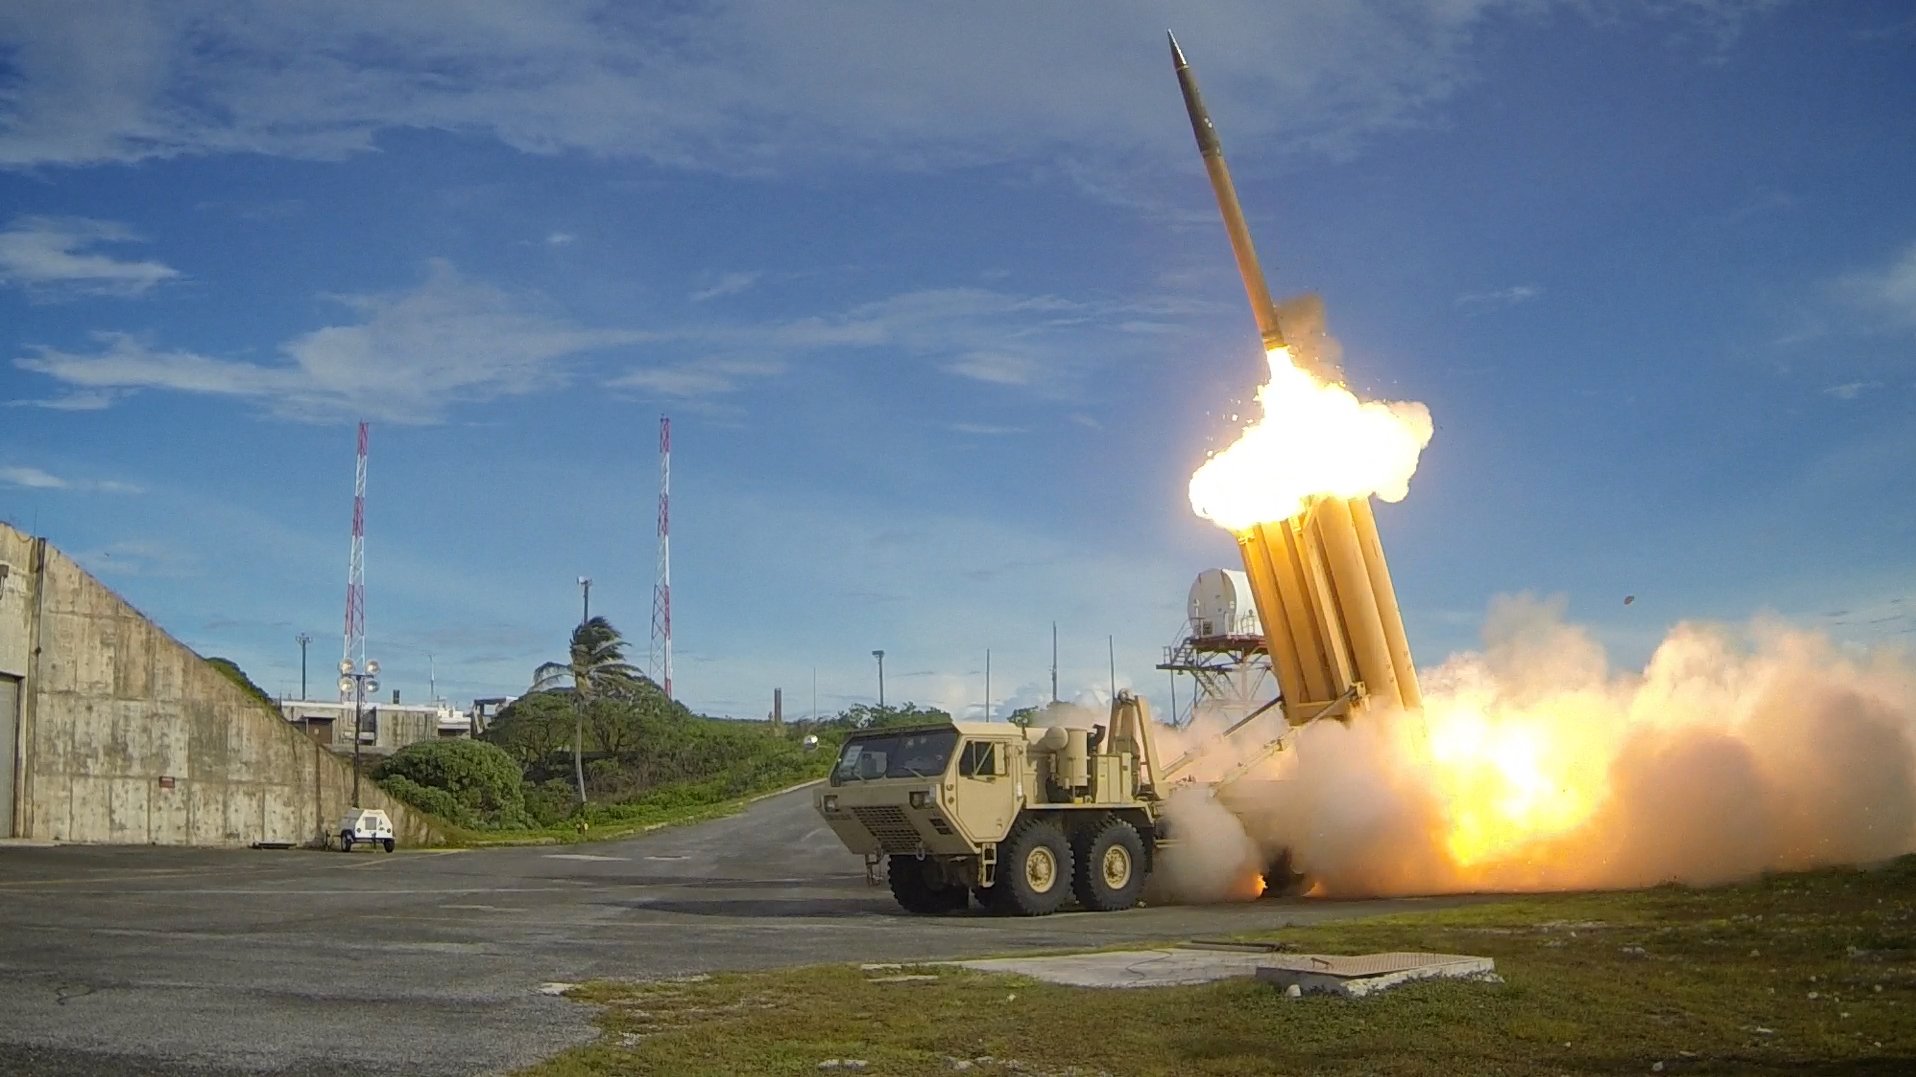 Army Missile Defense Stretched Thin: Readiness, Crisis Response At Risk